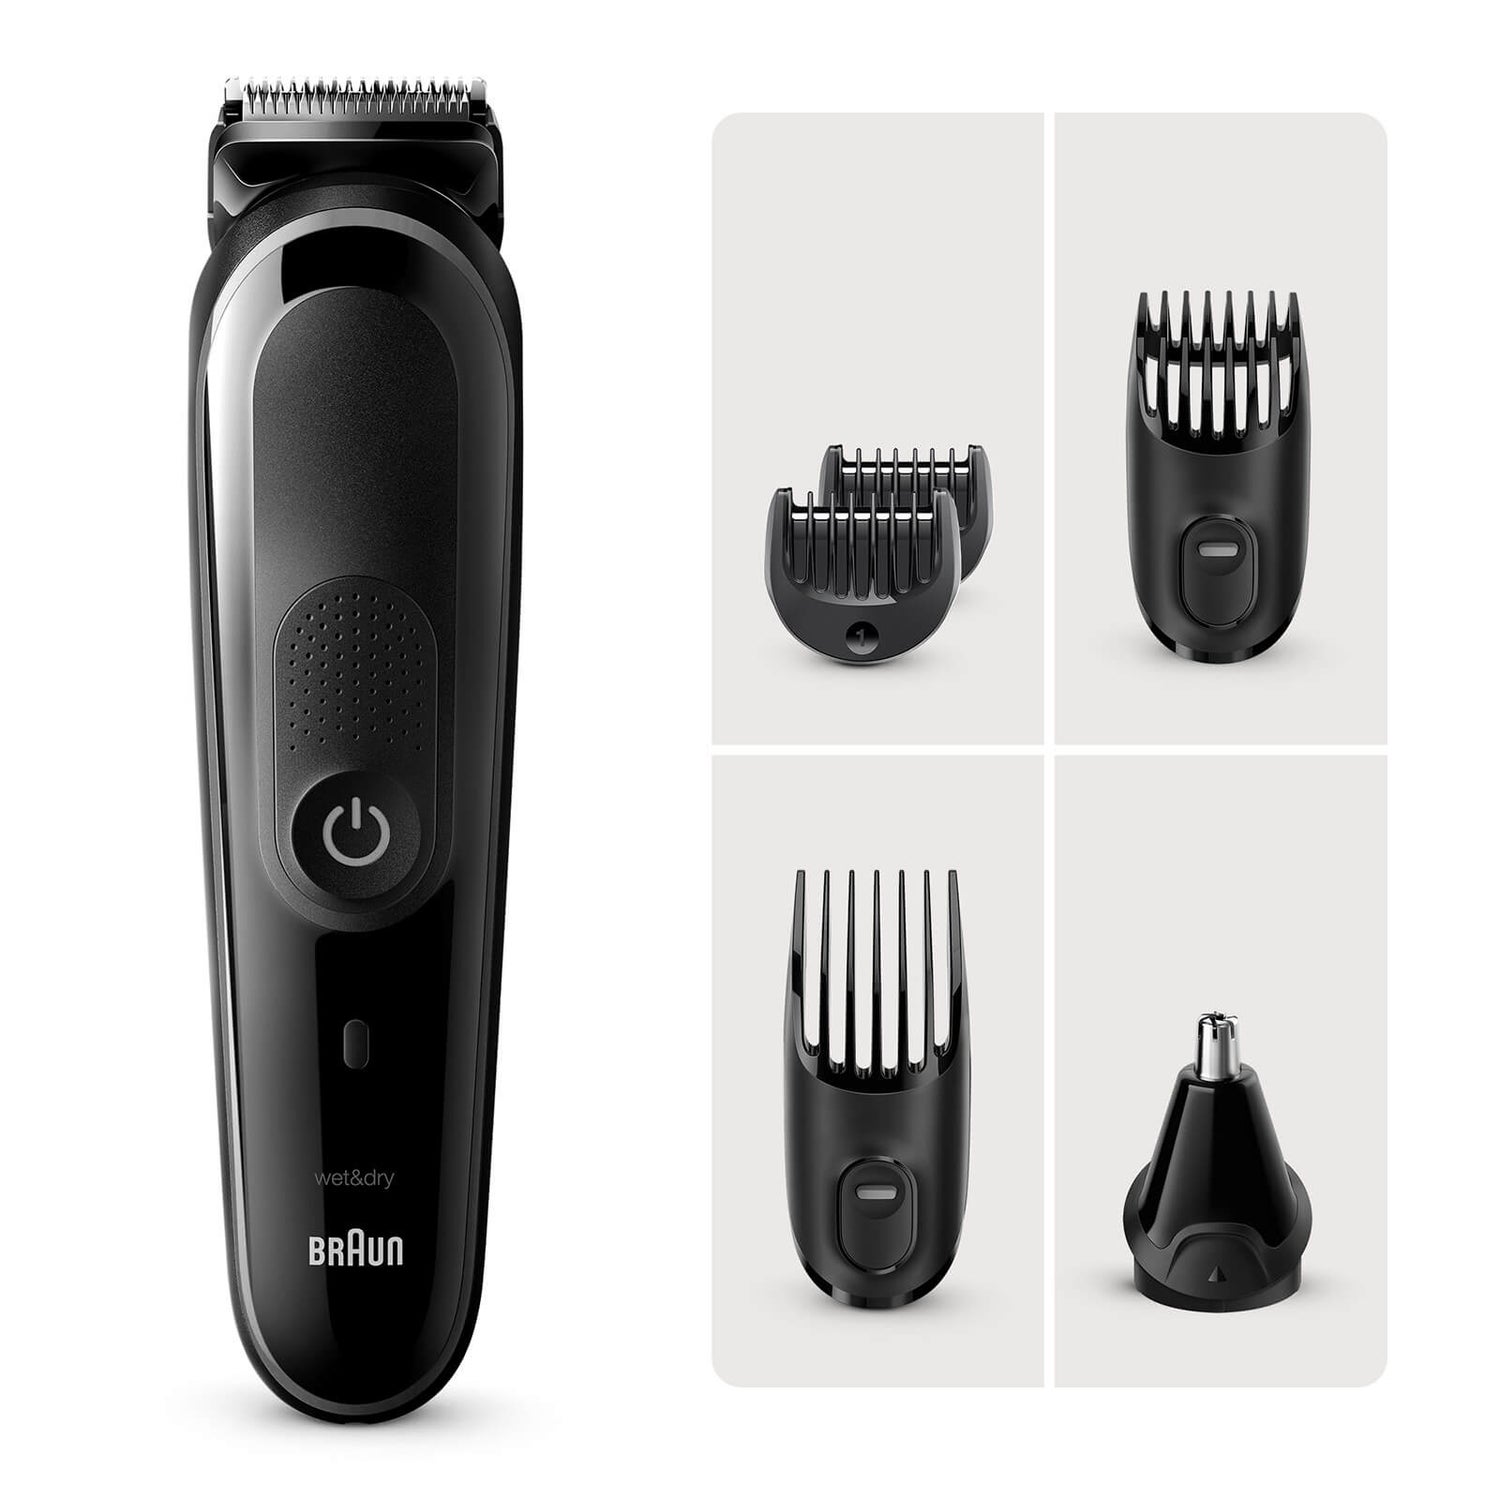 Braun All-in-one Trimmer with 5 attachments